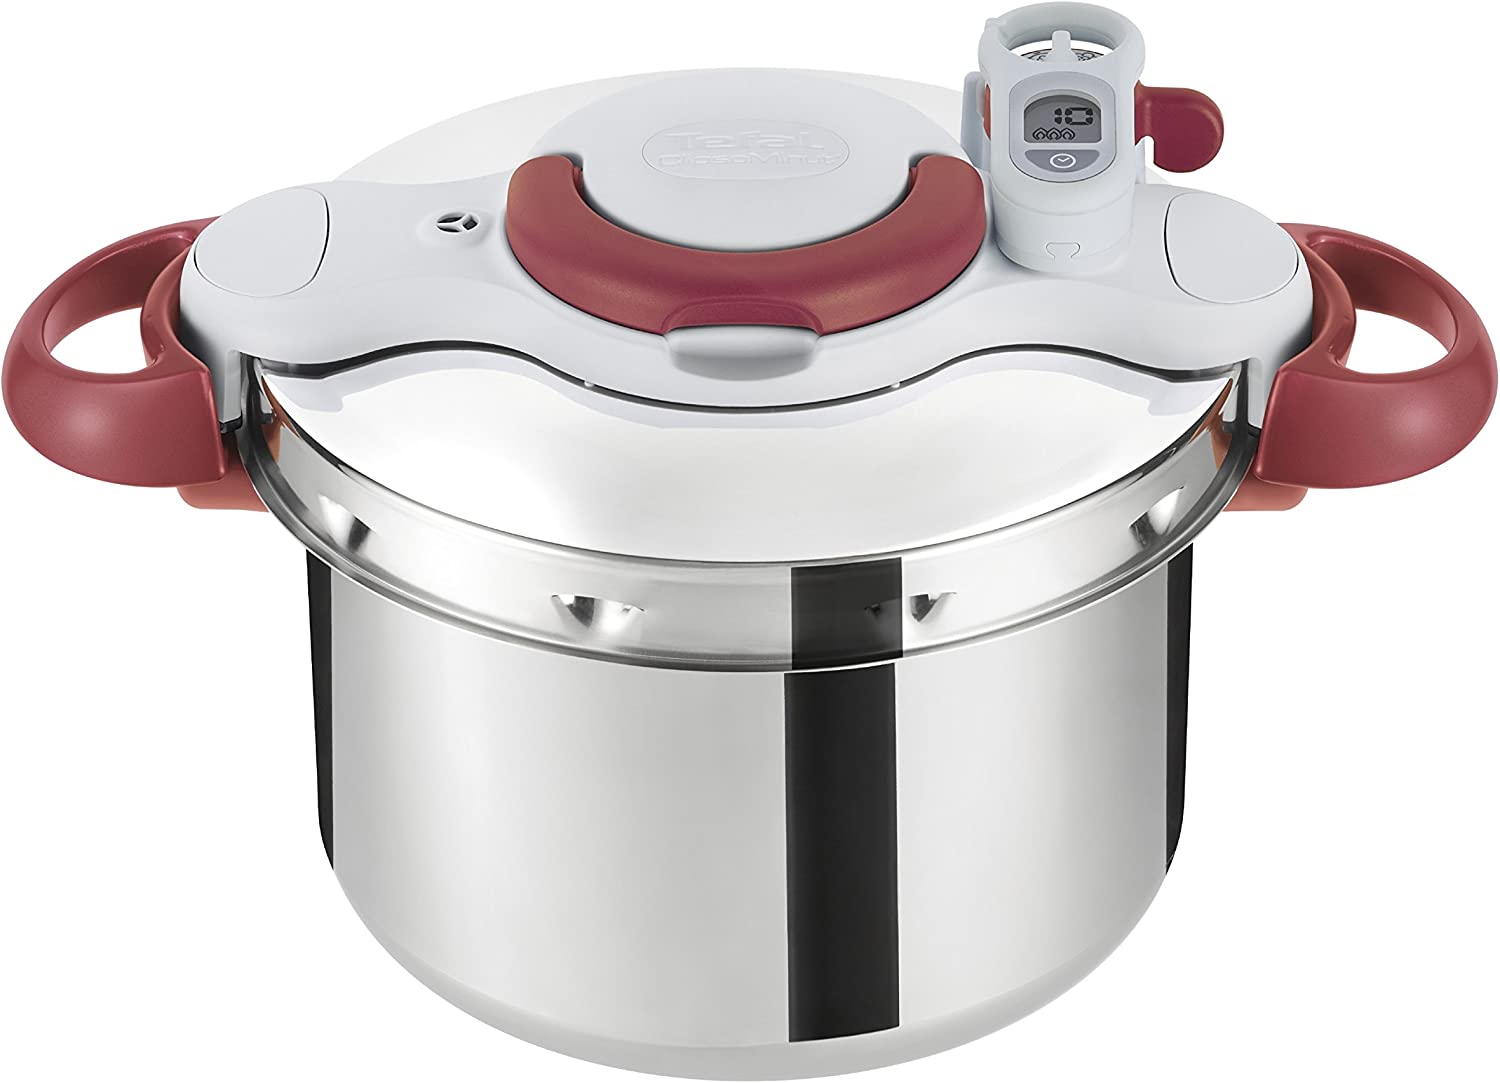 Tefal Clipso Minut Perfect Stainless Steel Pressure Cooker, Multi-Colour, 24 cm